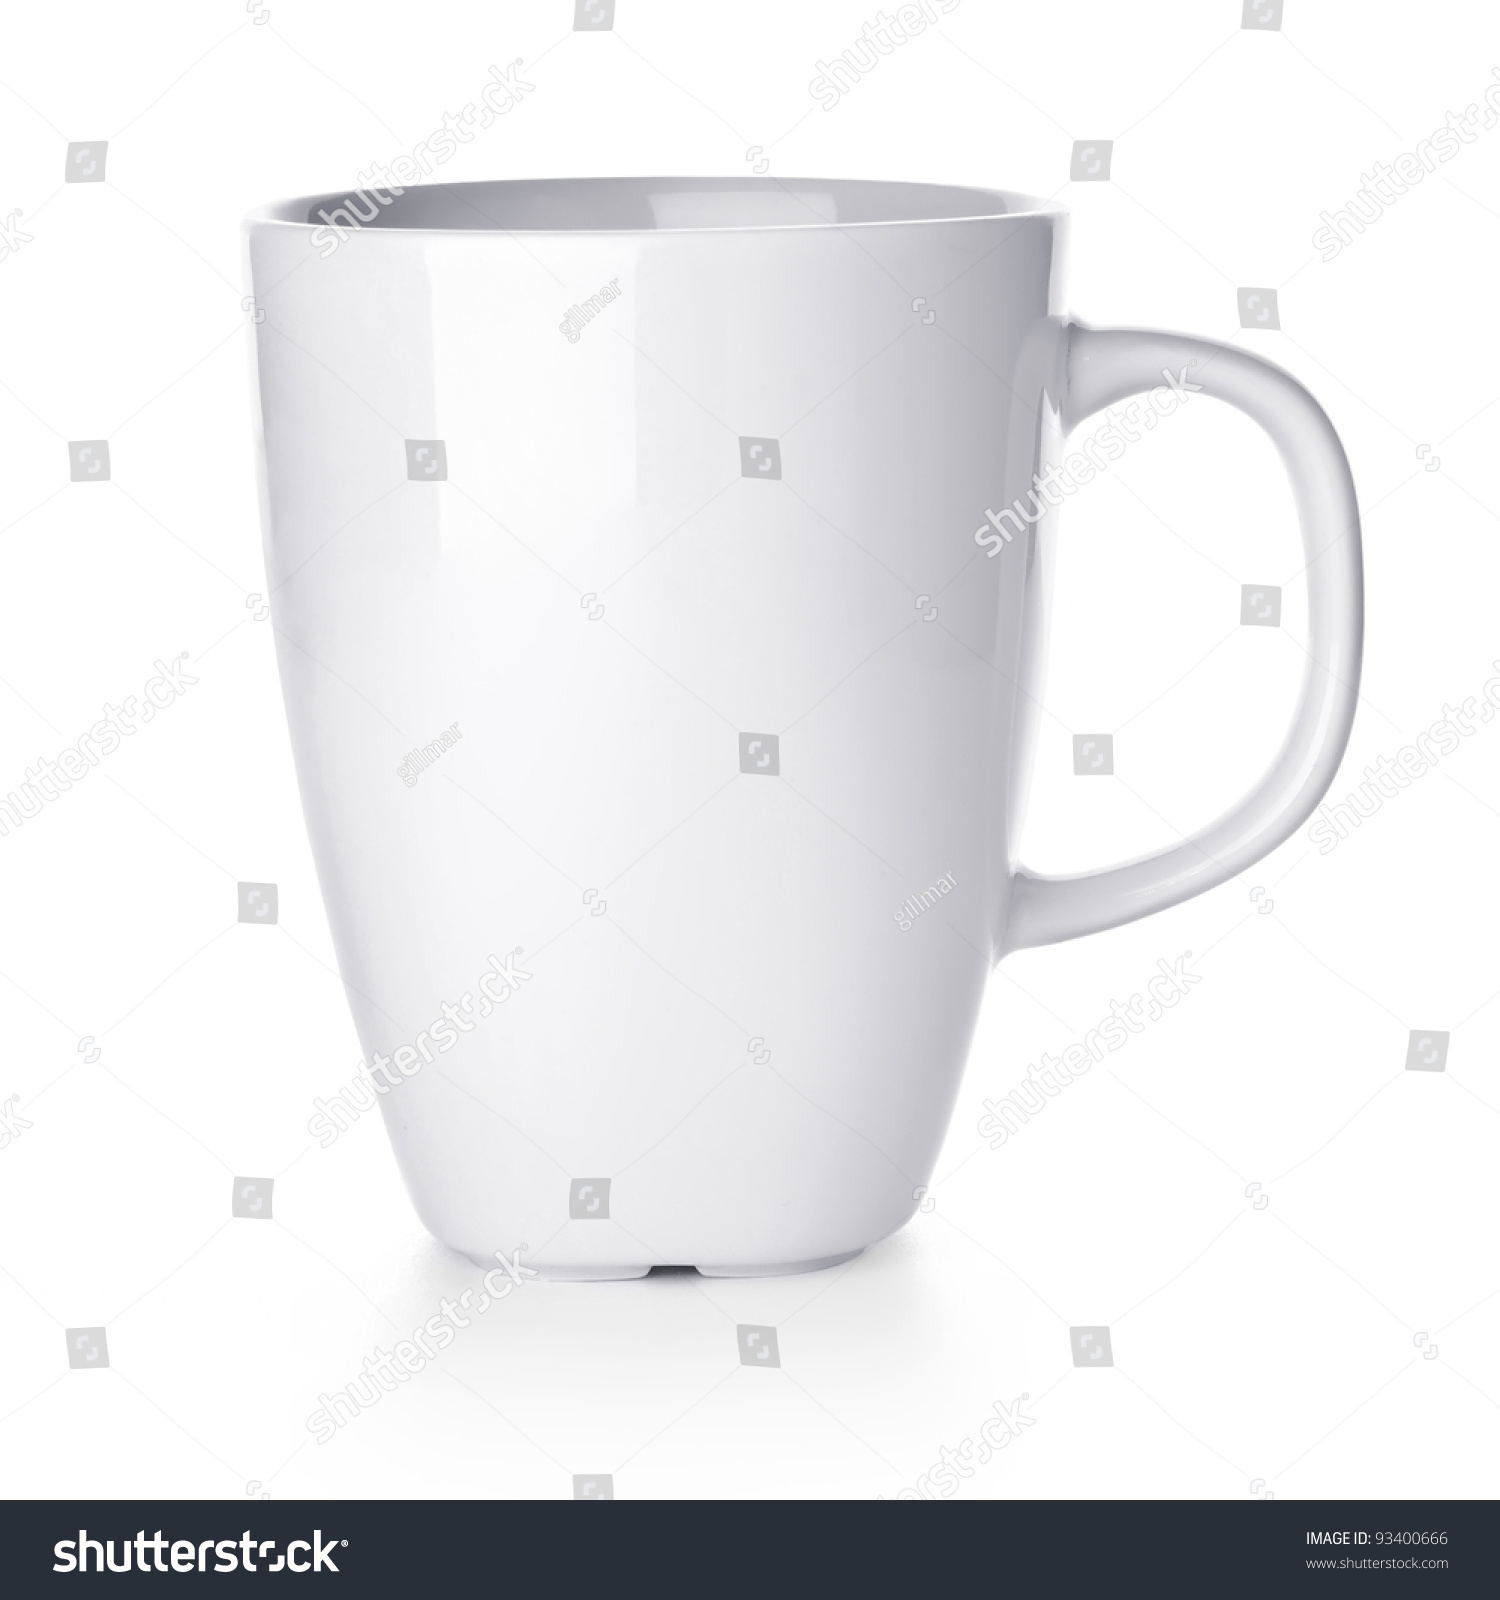 White Cup Isolated On White Background Stock Photo 93400666 : Shutterstock